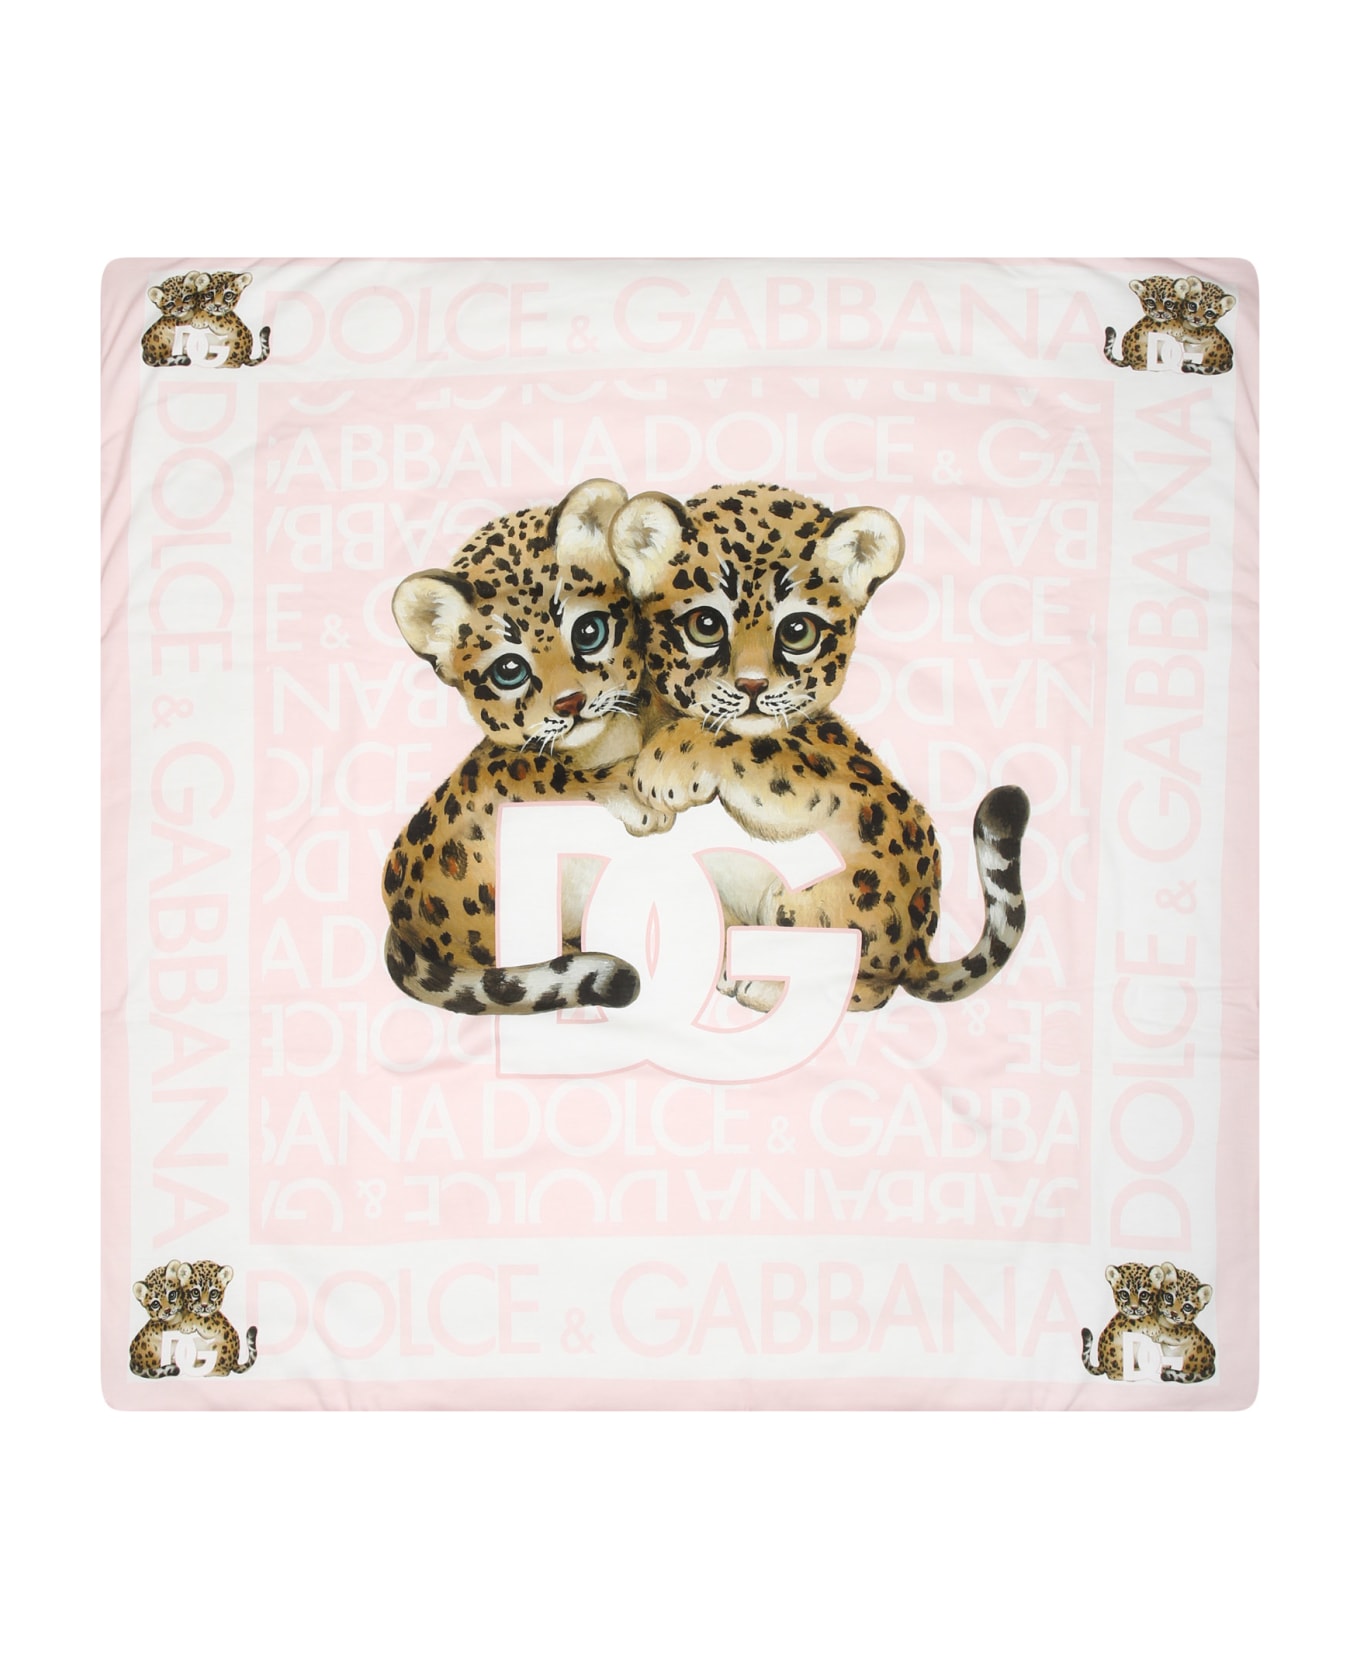 Dolce & Gabbana Pink Blanket For Baby Girl With Logomania And Leopard Print - Pink